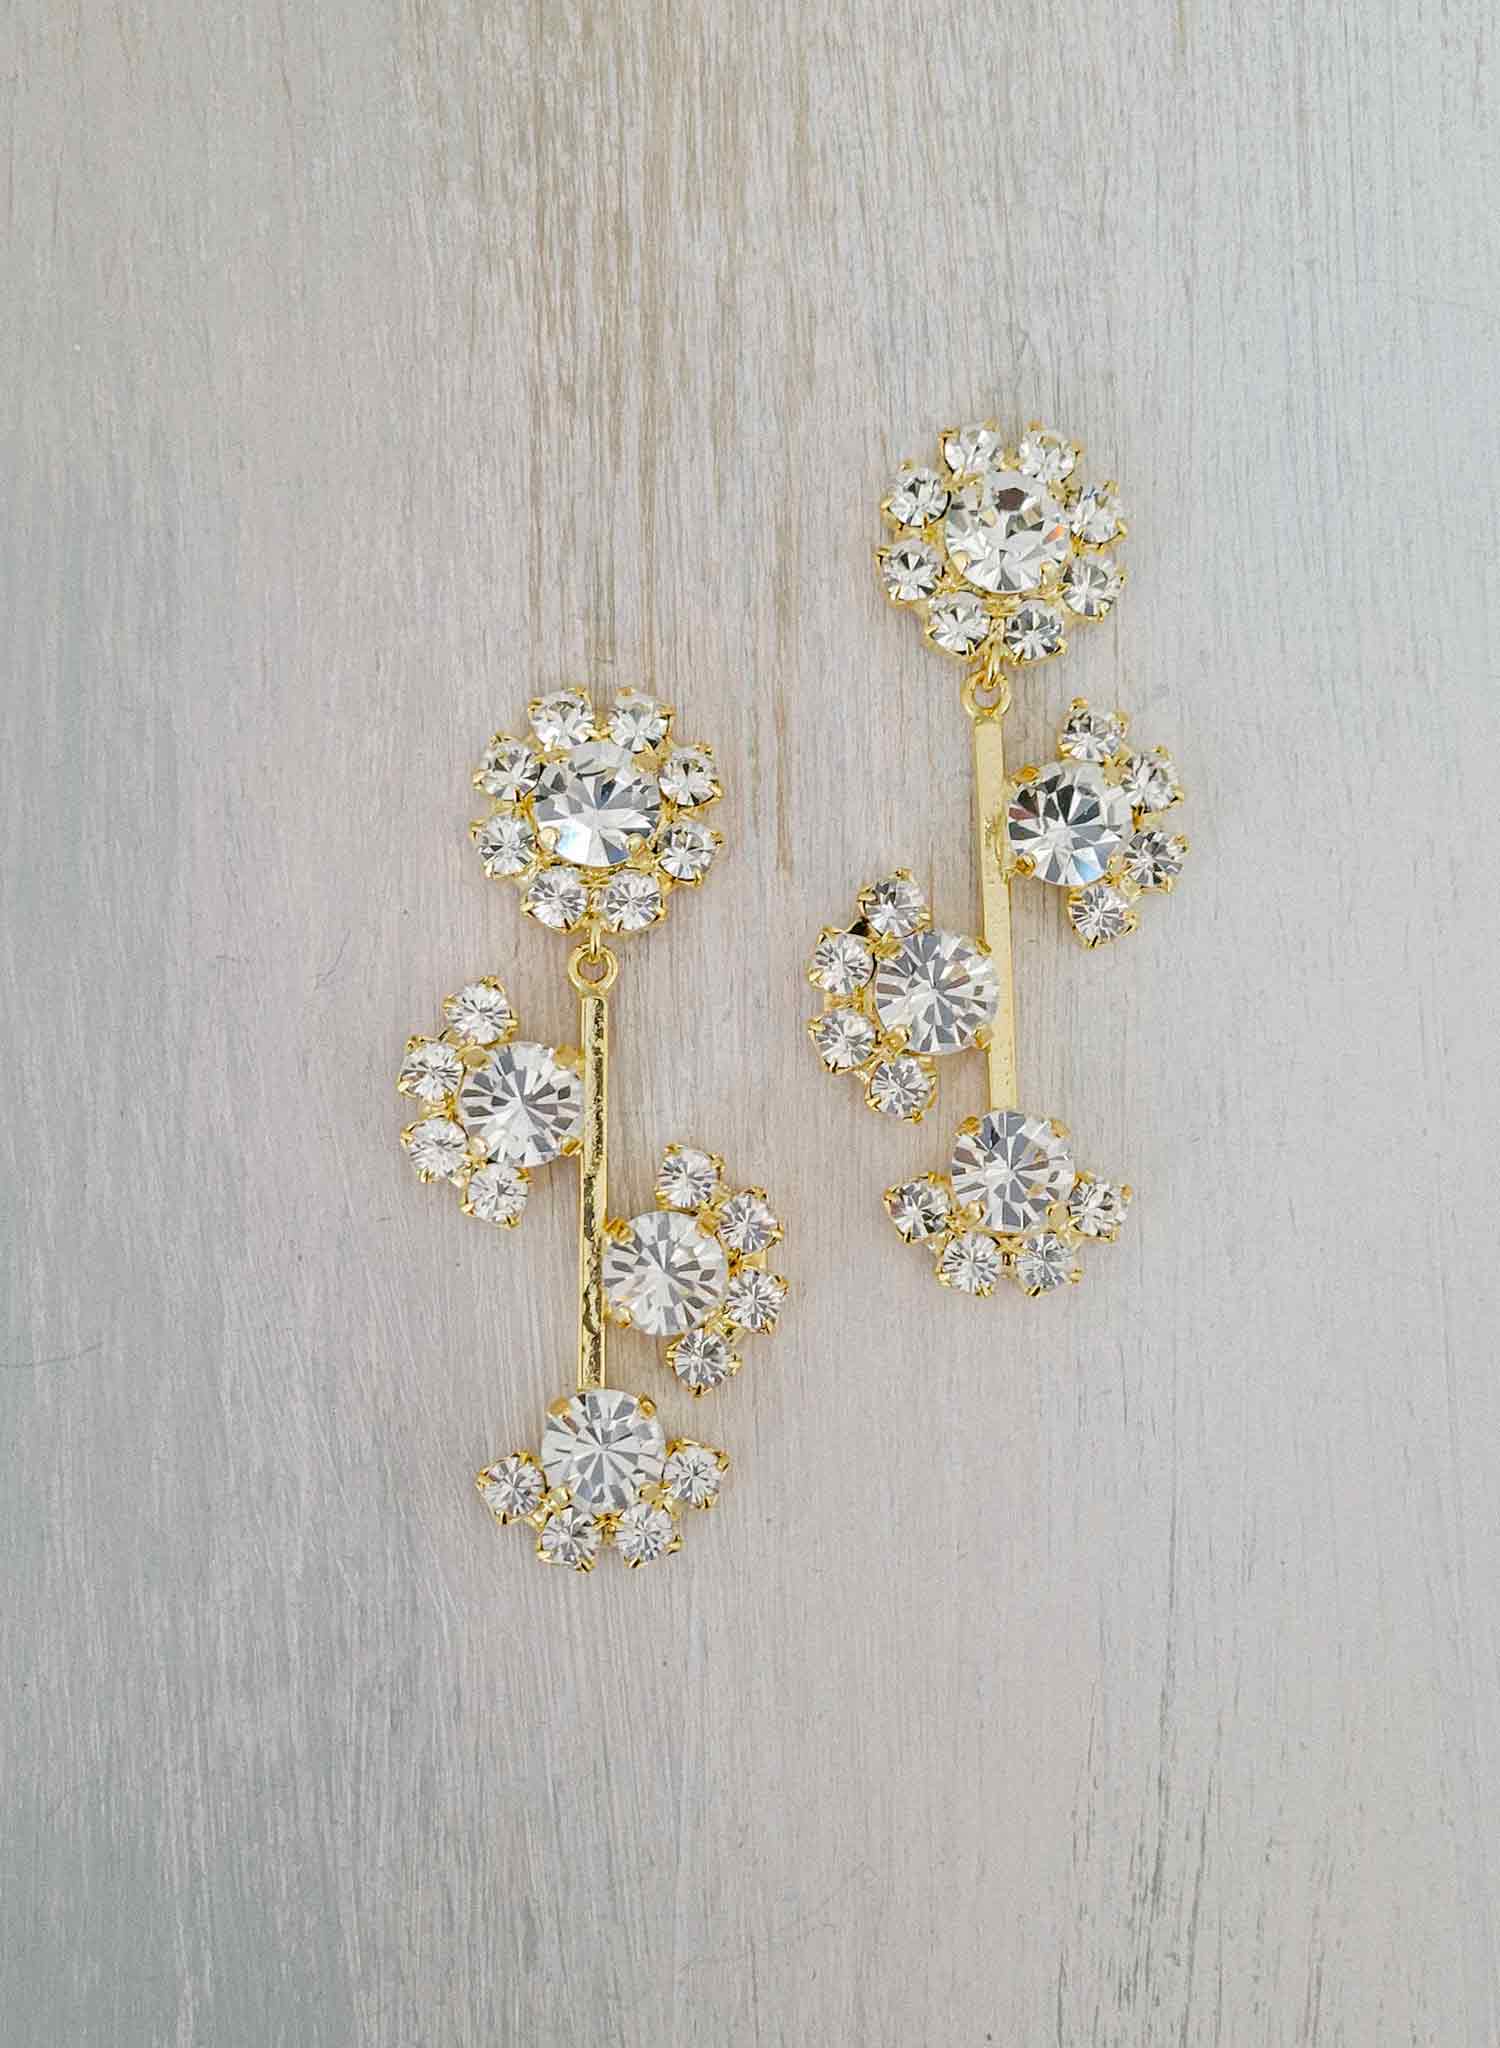 Dangling crystal blossom earrings - Style #2381